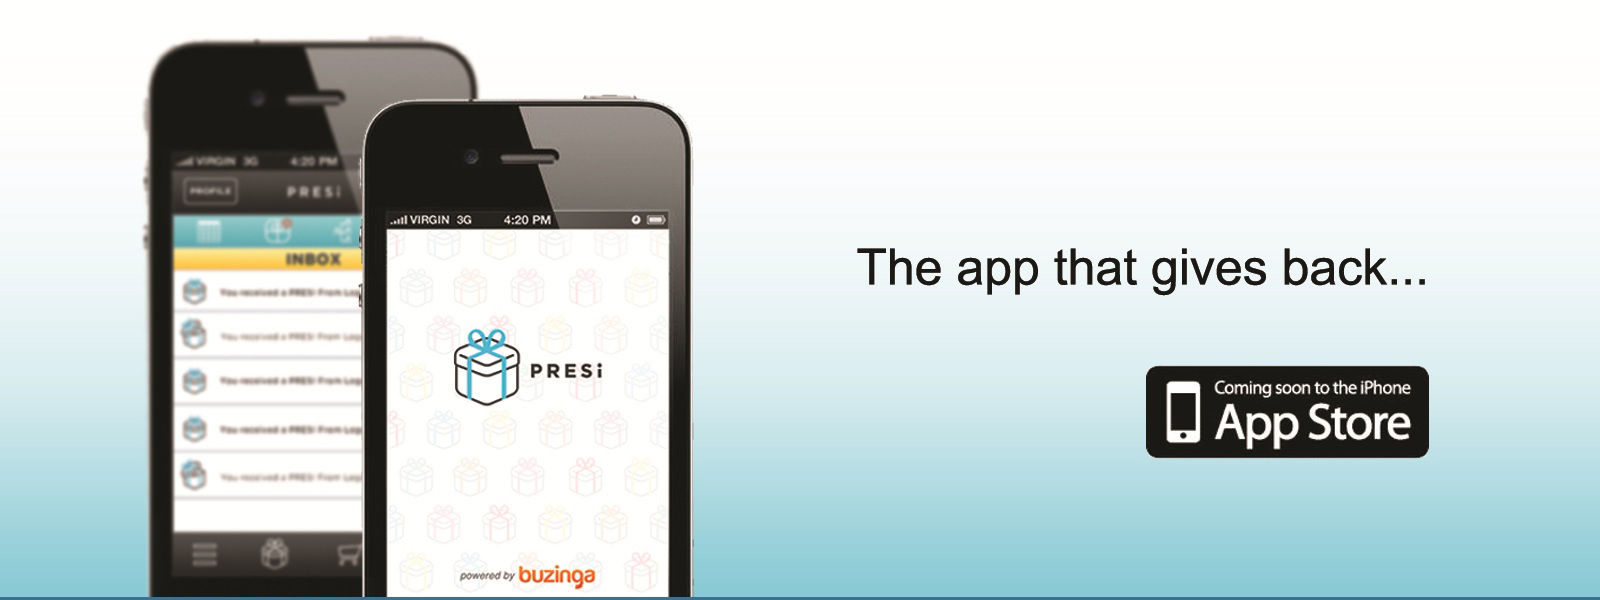 Buzinga mobile app development create the first app that hold the patent for virtual gifting